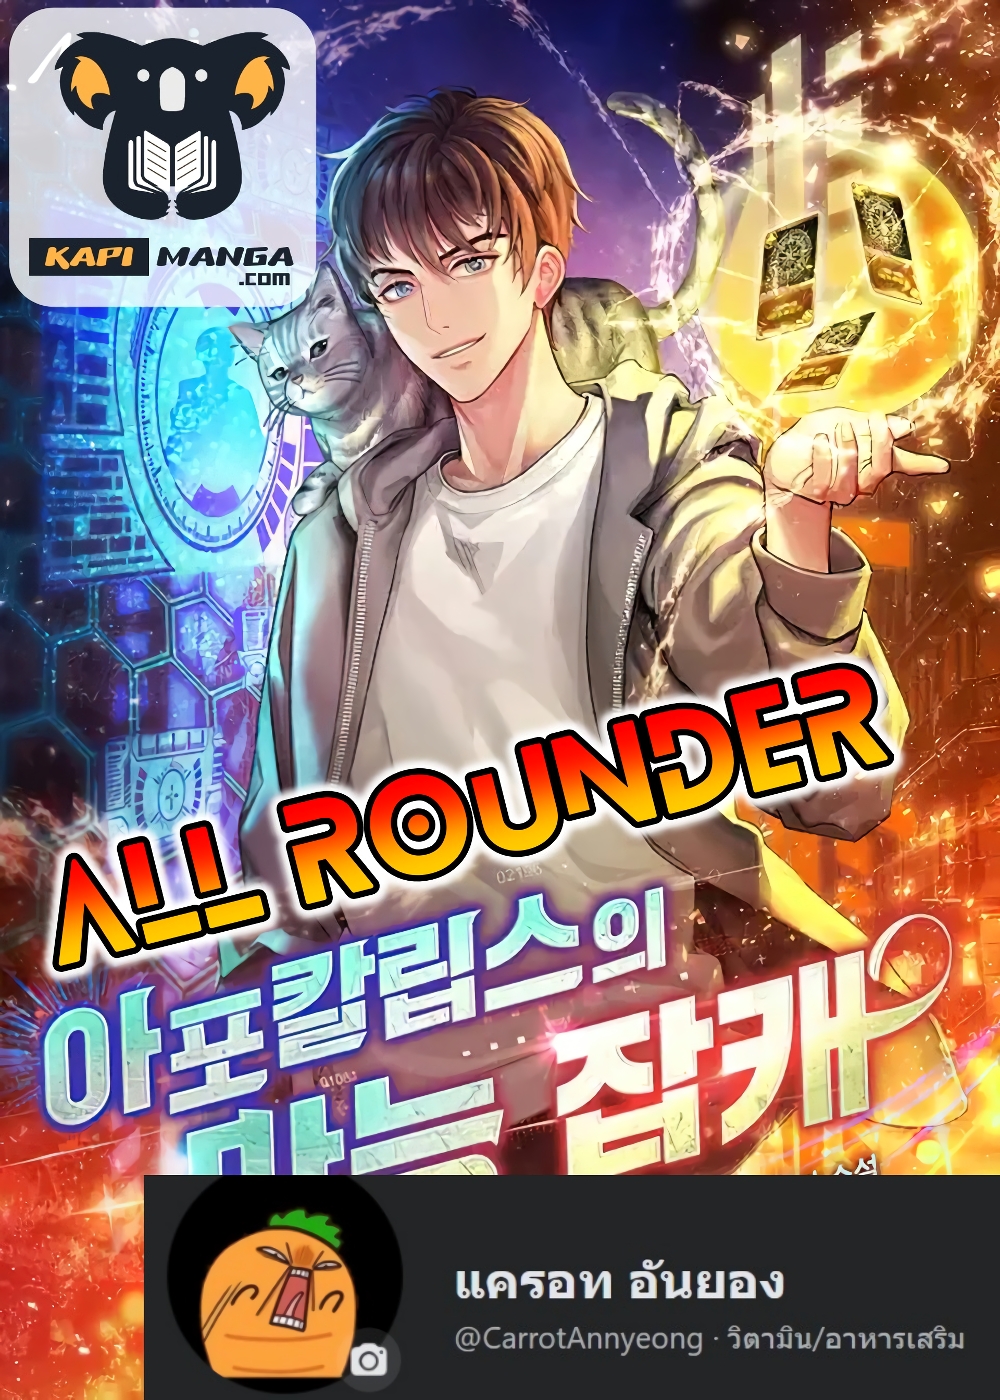 All Rounder15 (1)